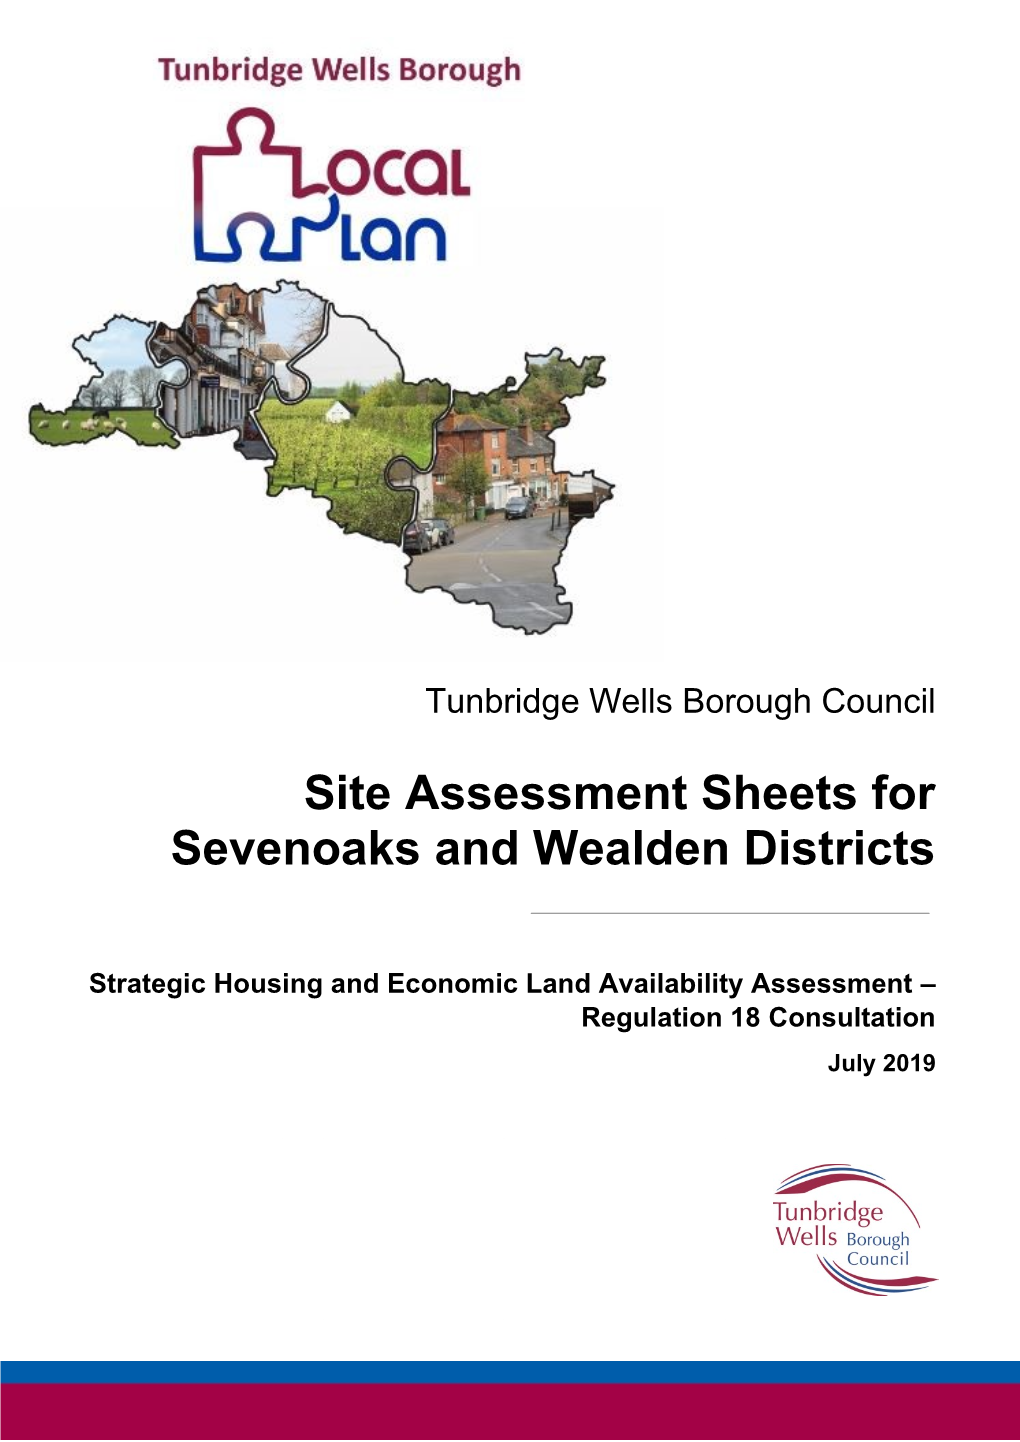 Site Assessment Sheets for Sevenoaks and Wealden Districts